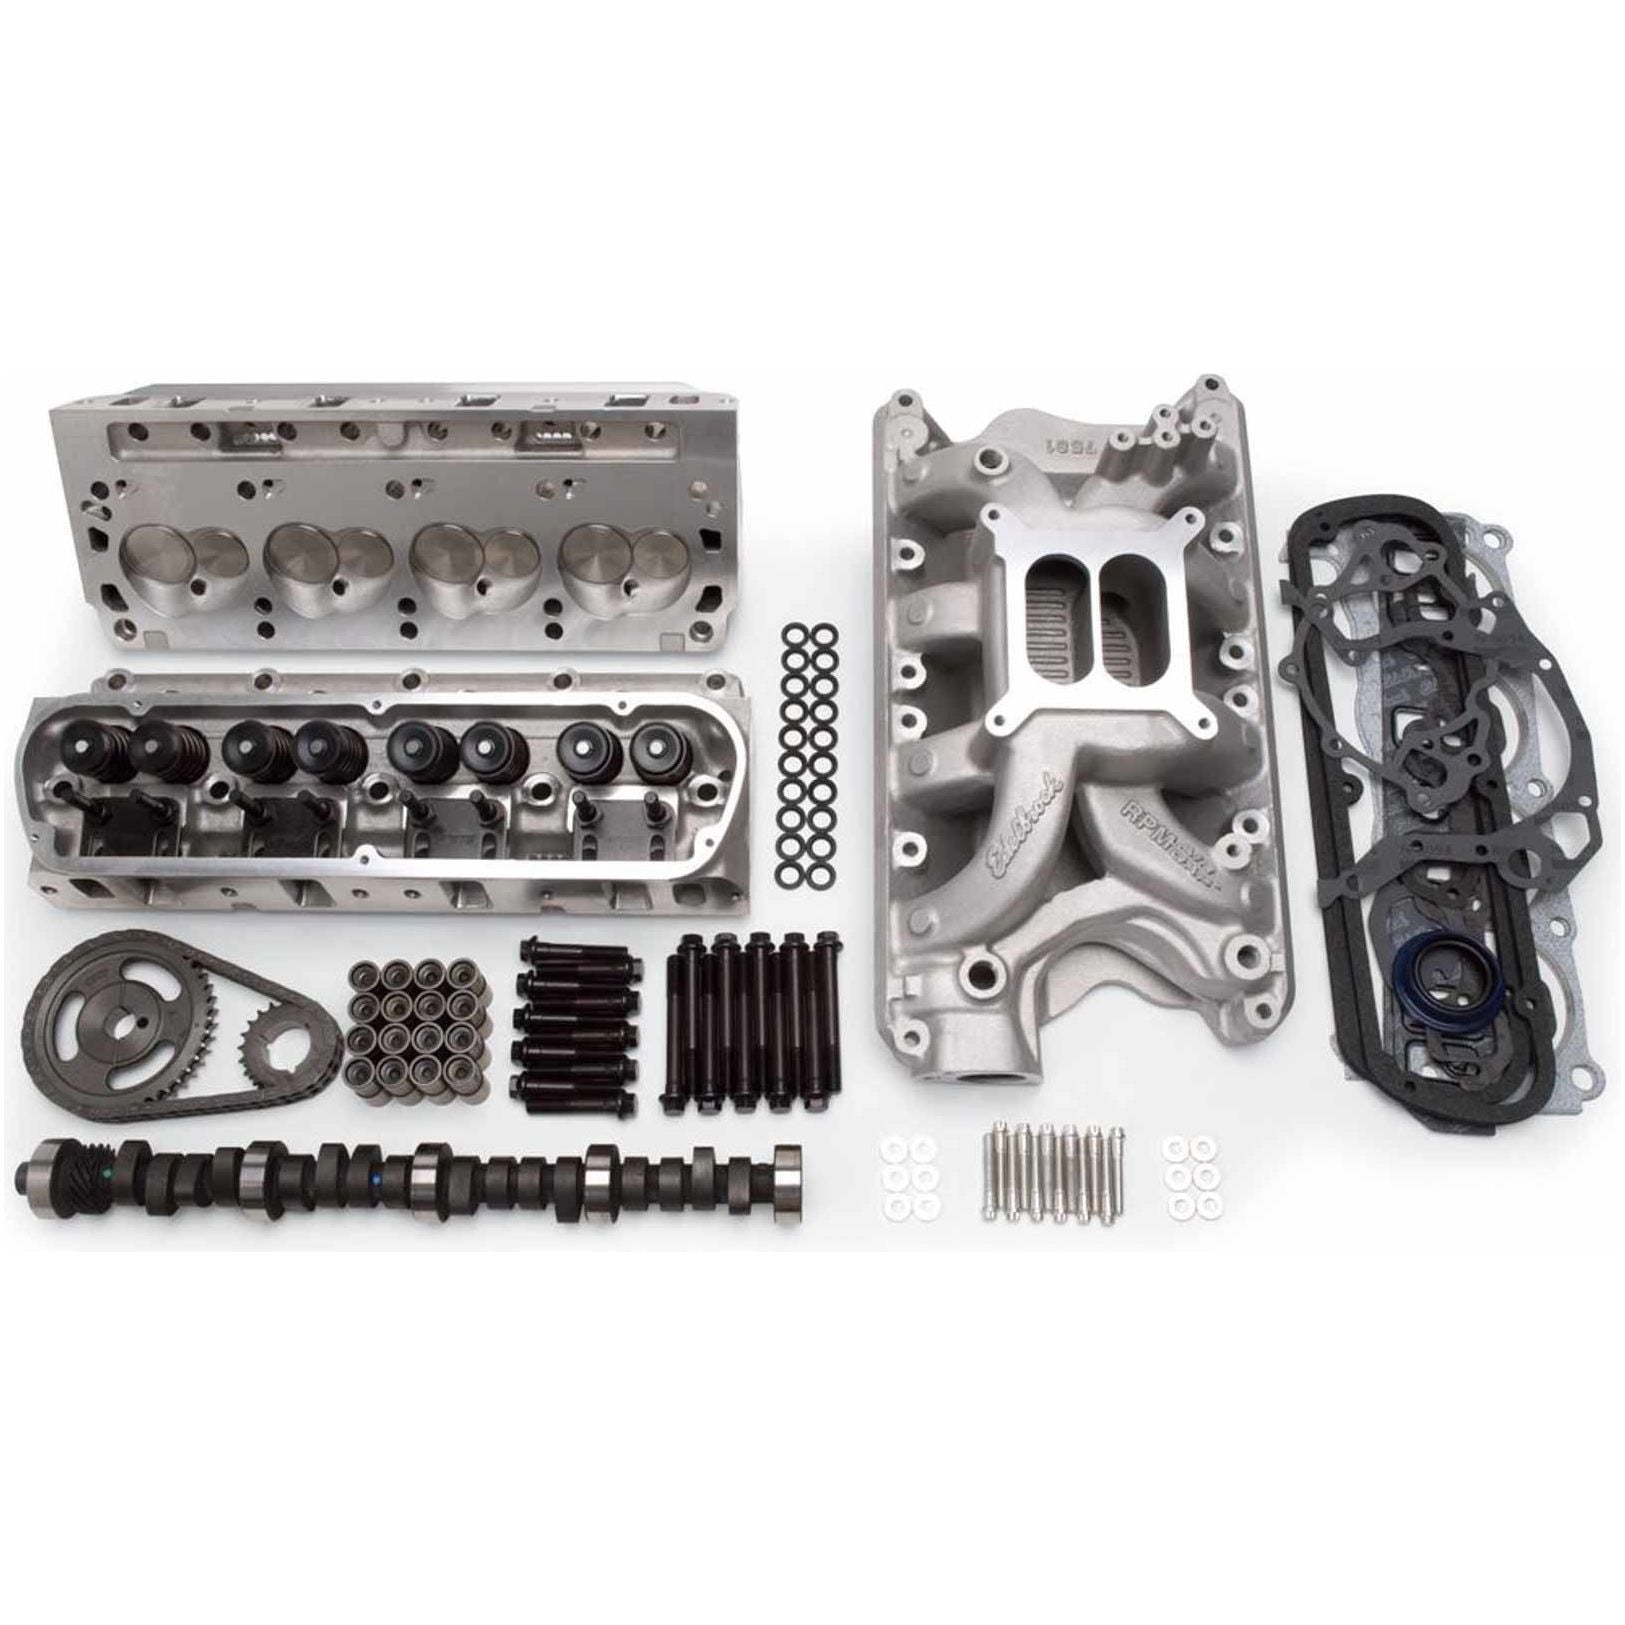 Edelbrock Total Power Package 400 HP 351W Small Block Ford Top-End Engine Kit 2092